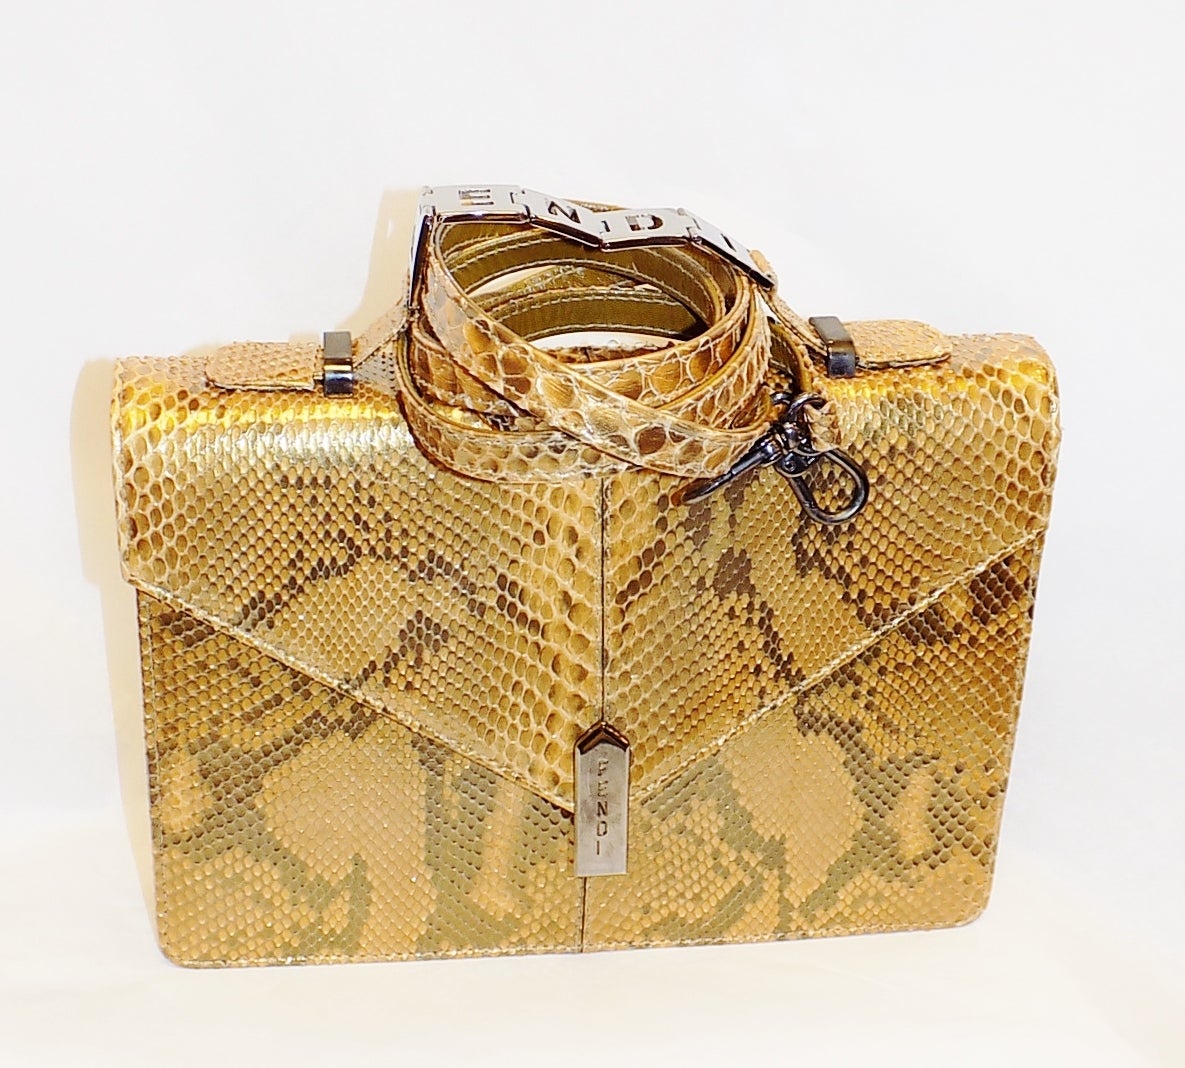 Women's Fendi special order bag  in python from 1996 with all documents  so awesome!